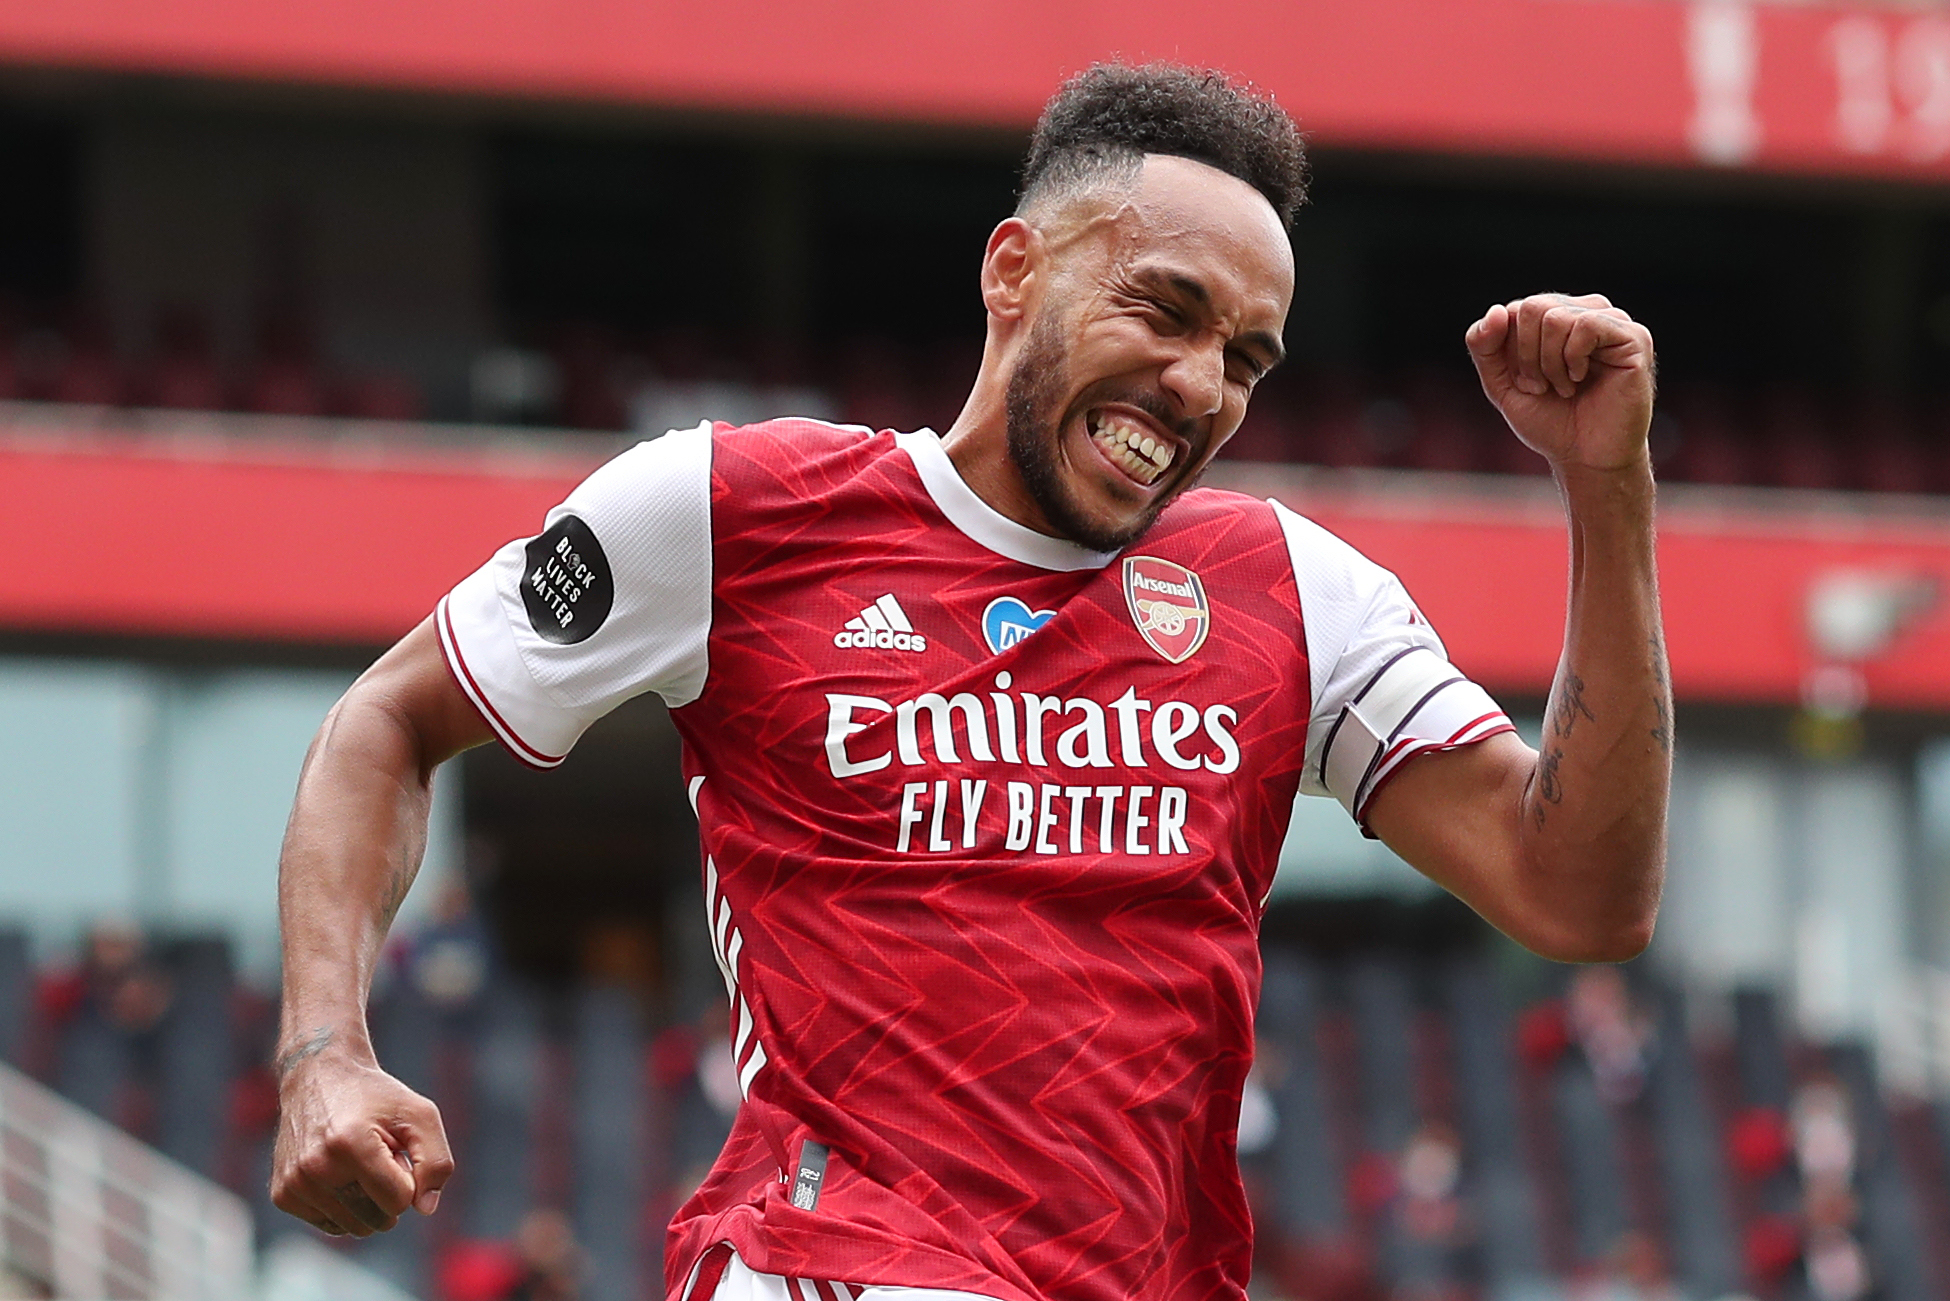 Arsenal transfer rumour round-up: Gunners ready new Aubameyang deal as Willian move edges closer